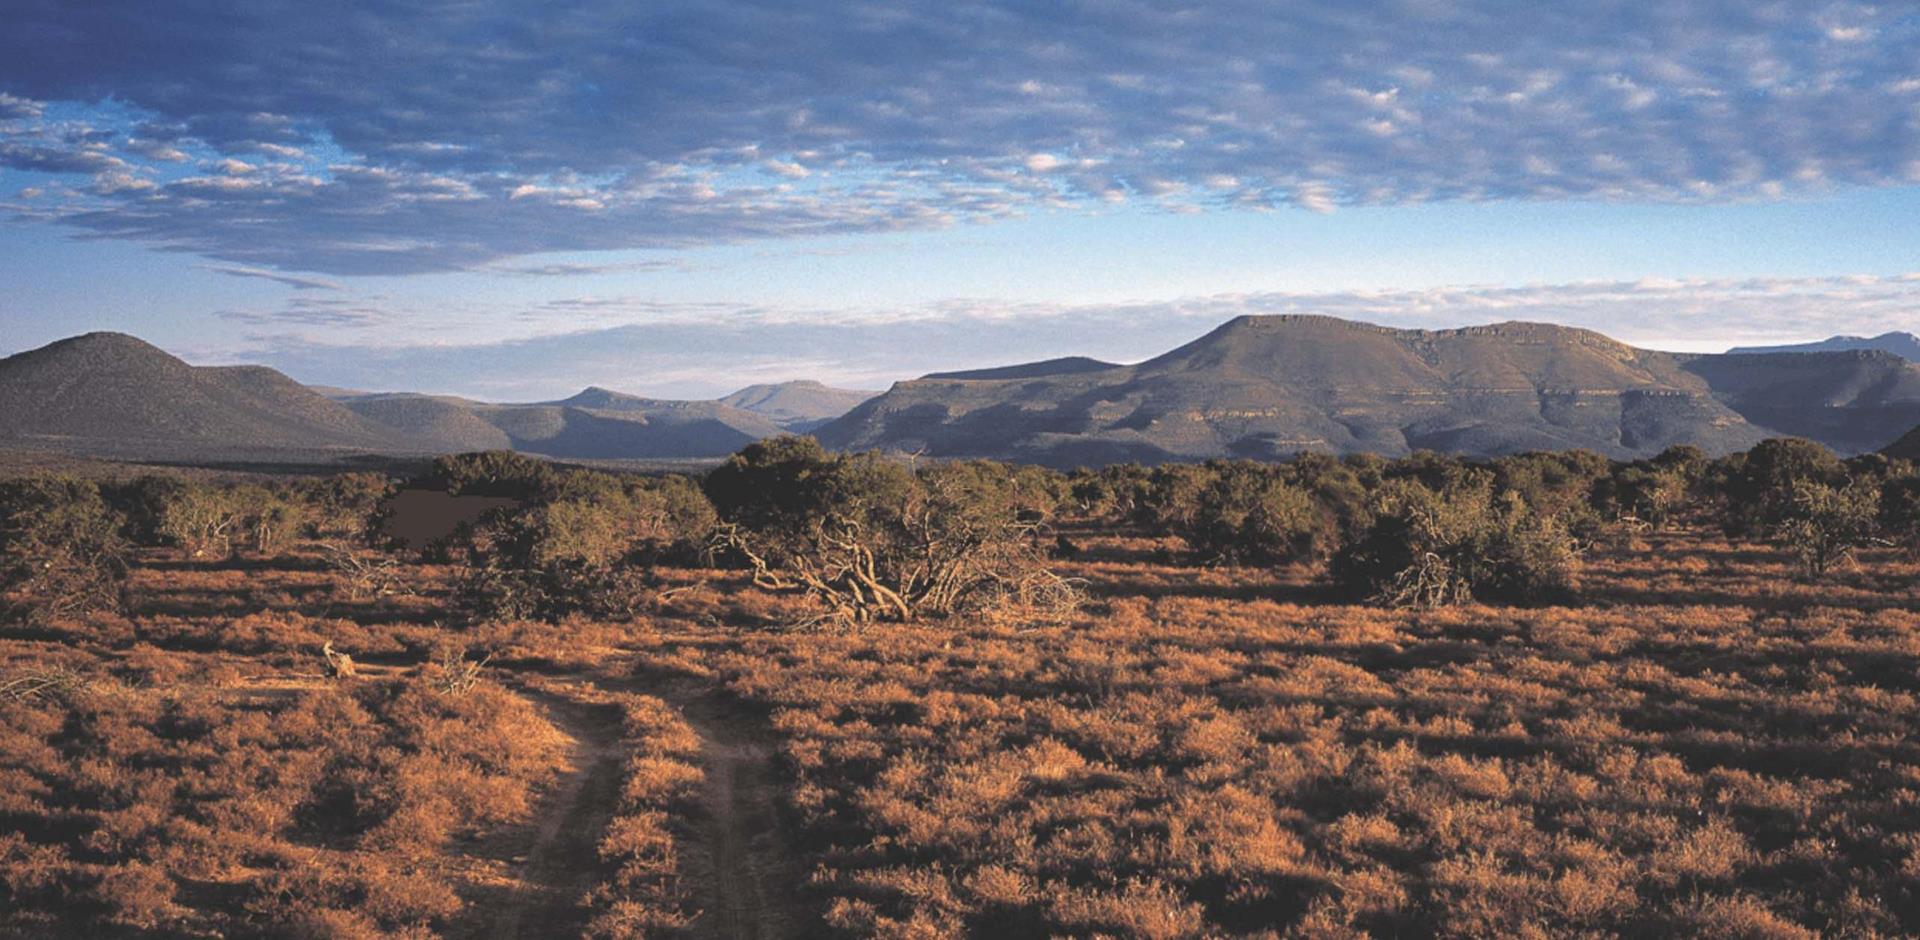 A&K itinerary: The Great Karoo, South Africa